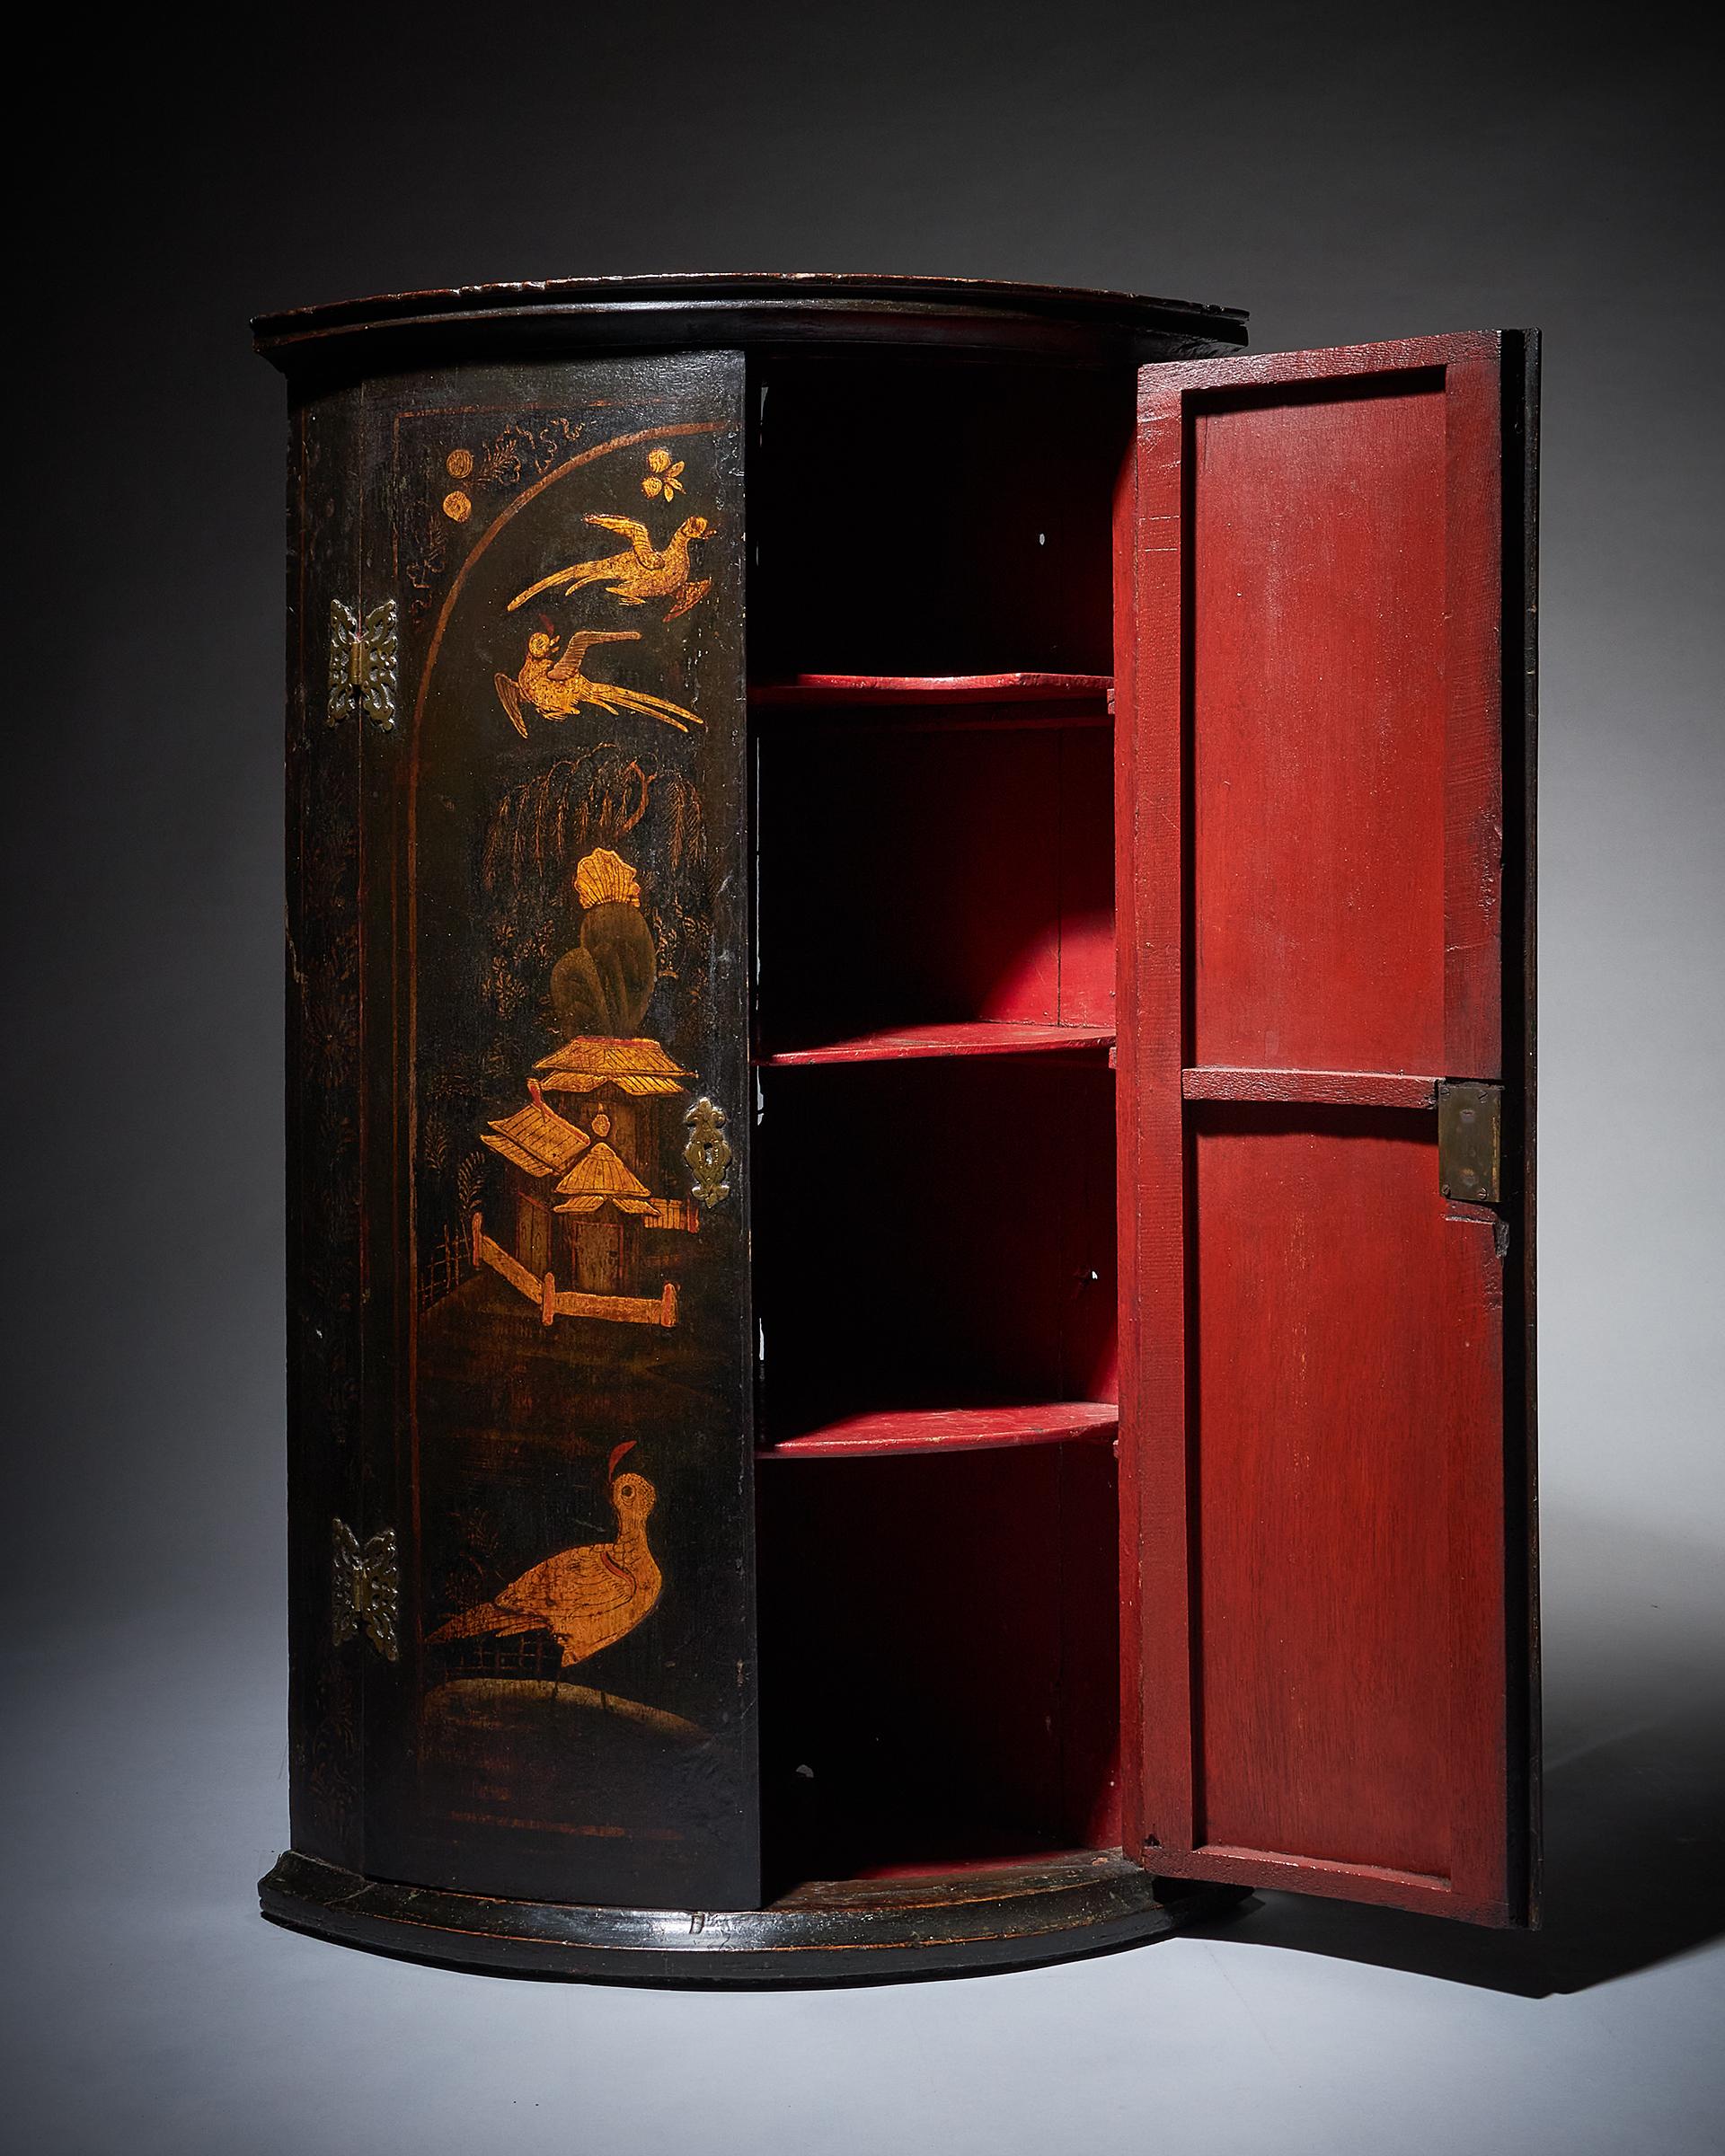 A very atmospheric and original Queen Anne to George I black japanned chinoiserie corner cupboard. England, circa 1720-1740

The exterior is decorated in naive chinoiserie scenes depicting figures, birds, foliage, insects, dwellings and the sun.